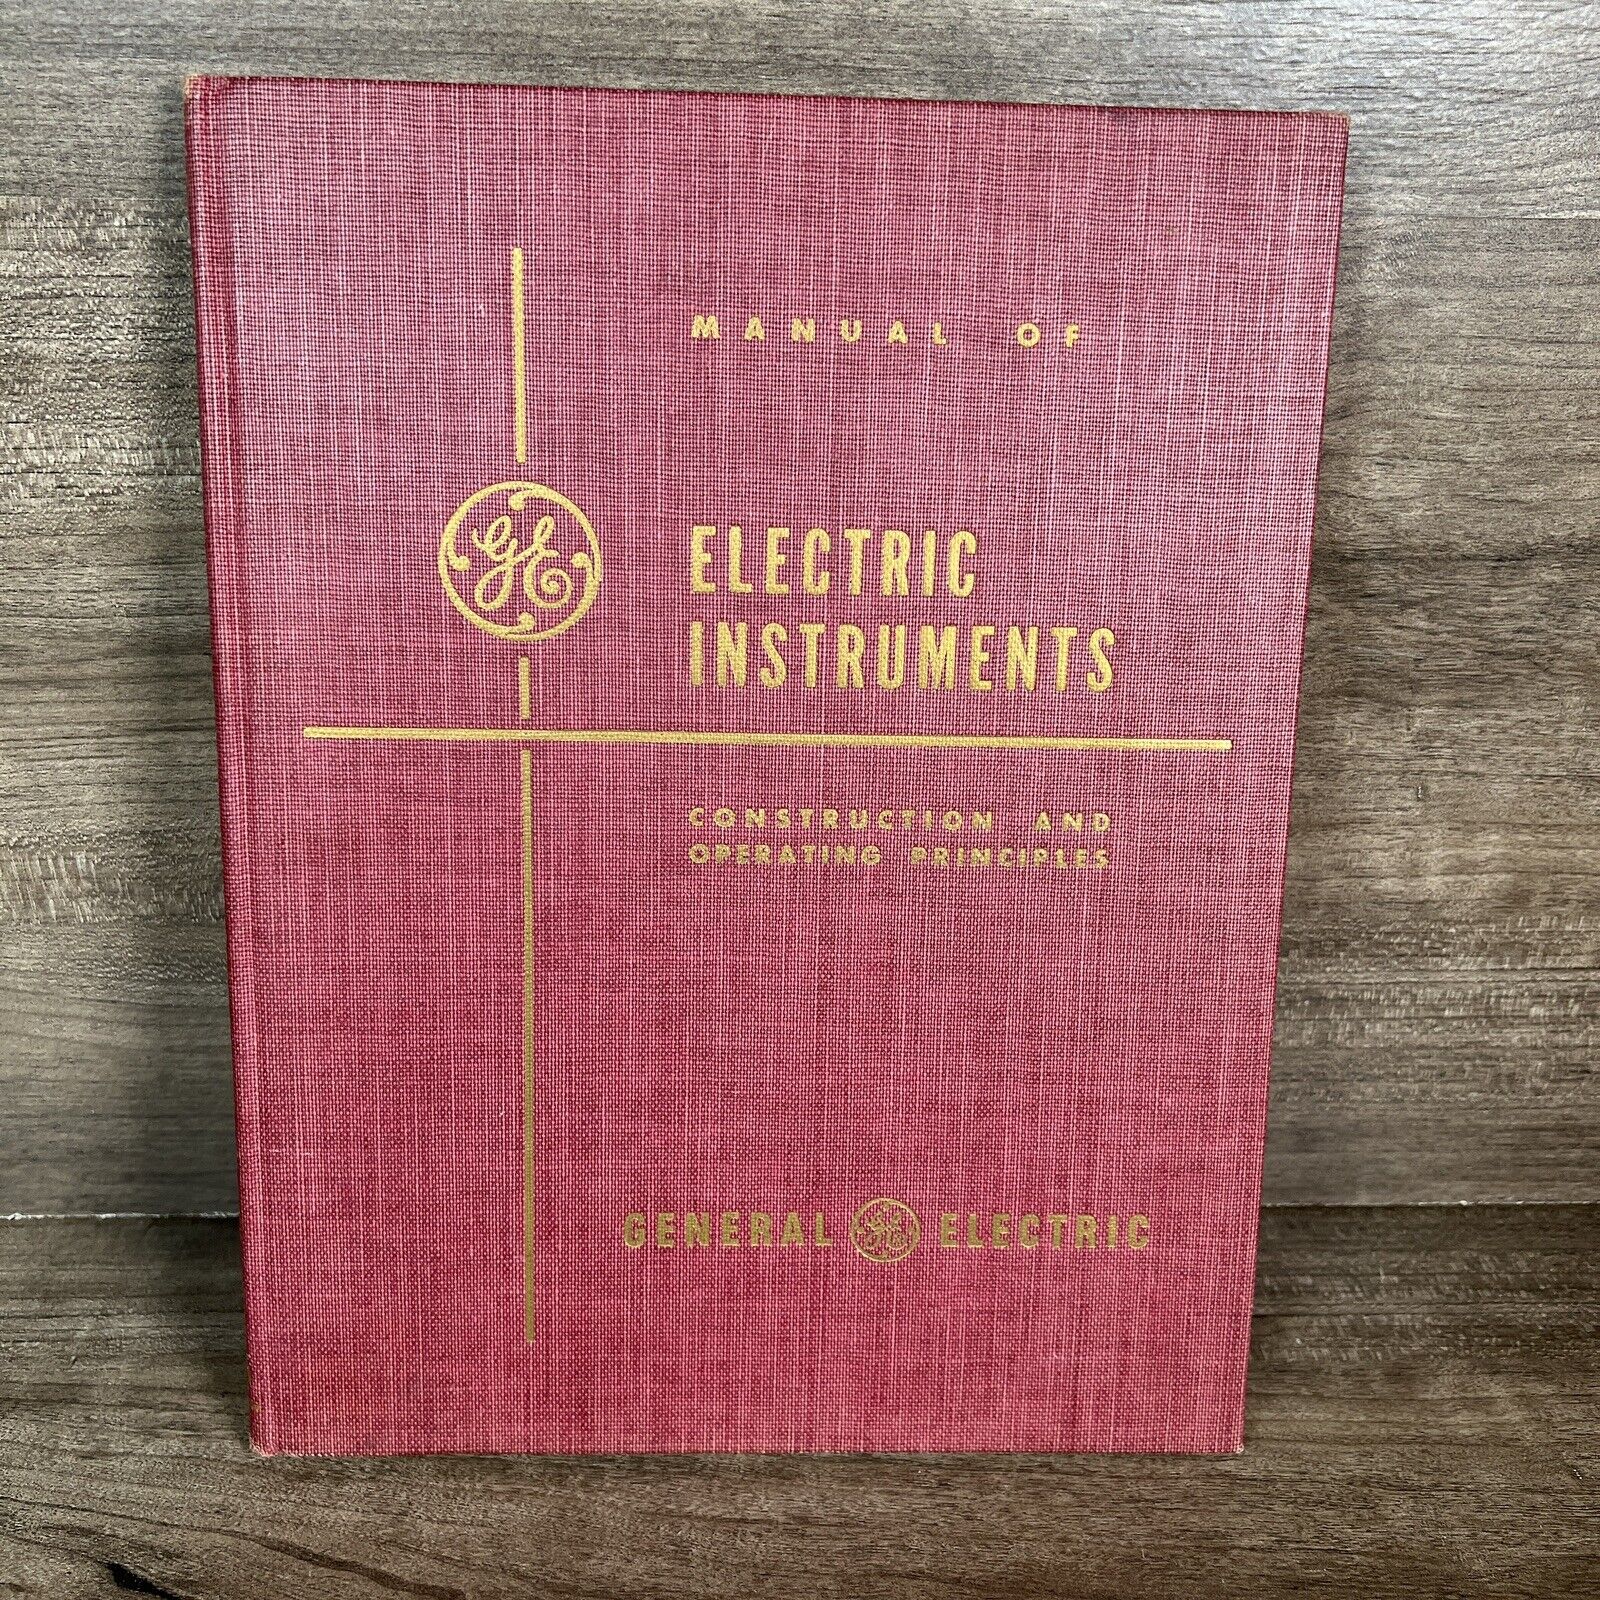 GENERAL ELECTRIC Manual Of Electric Instruments Construction Operating Book